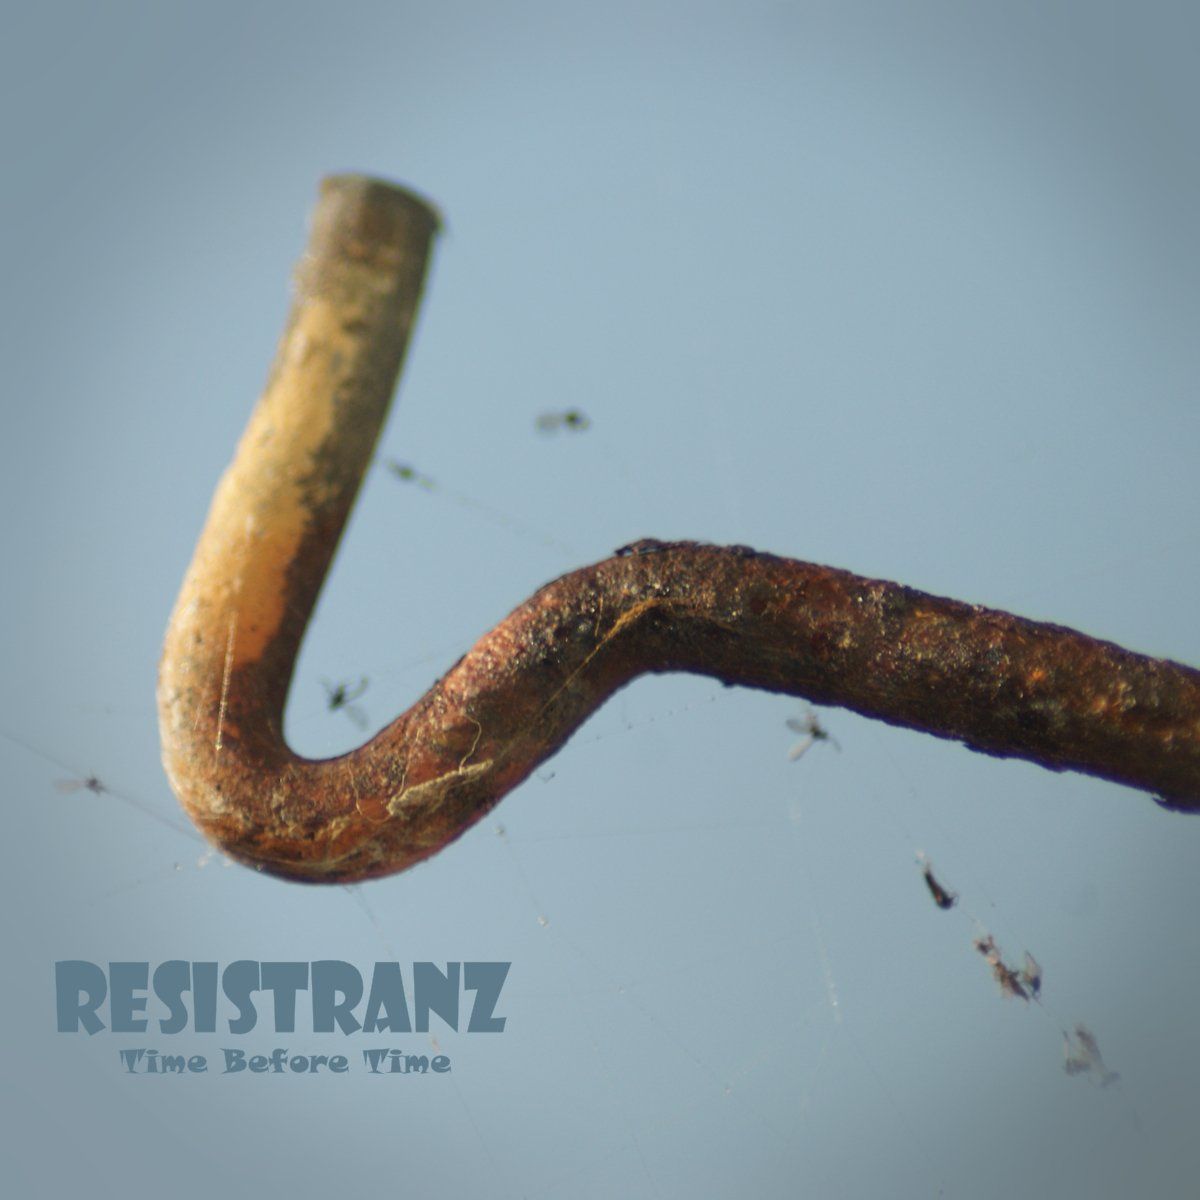 Resistranz-Time Before Time